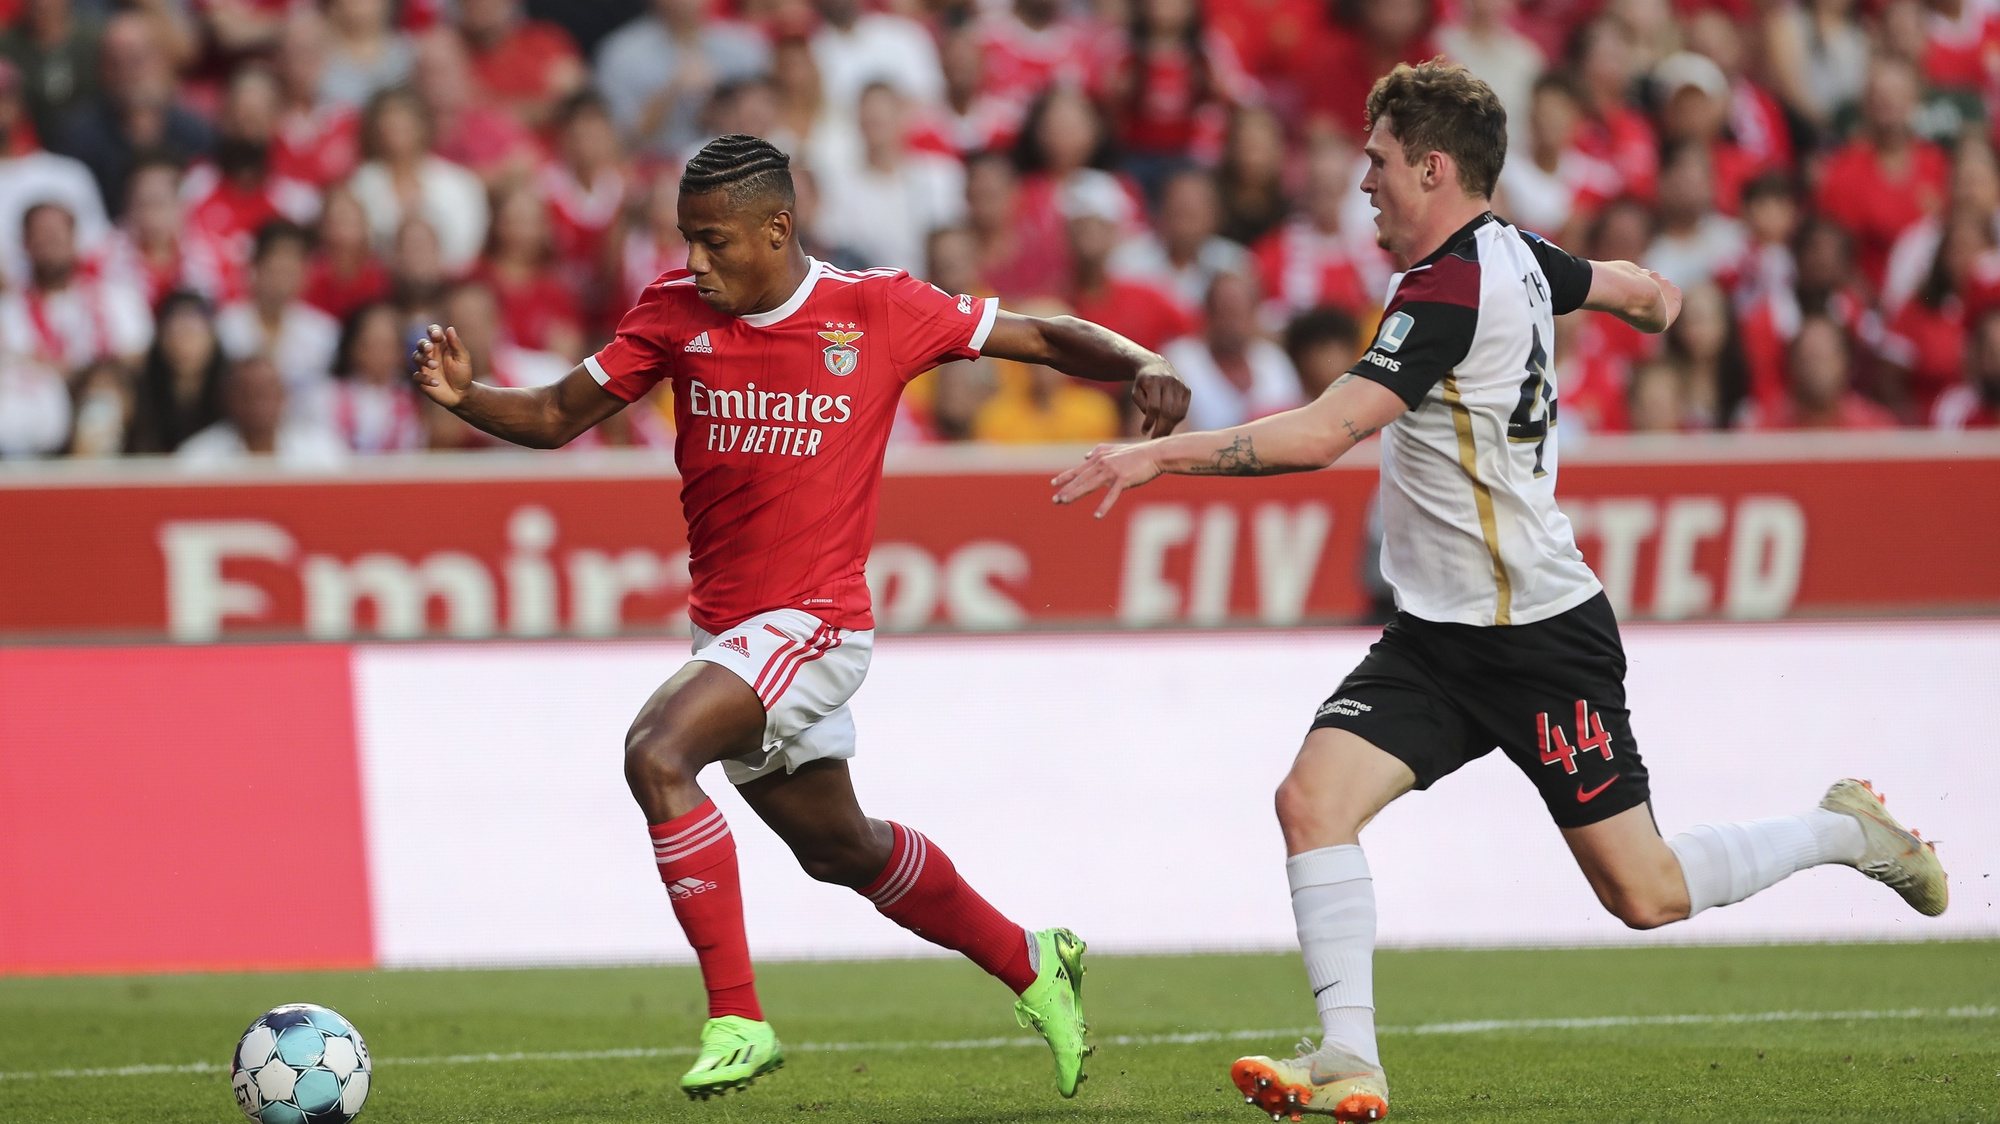 epa10103116 Benfica player David Neres (L) in action against Midtjylland player Nicolas Dyhr during the UEFA Champions League qualifying match between SL Benfica and FC Midtjylland held at Luz stadium in Lisbon, Portugal, 02 August 2022.  EPA/MIGUEL A. LOPES